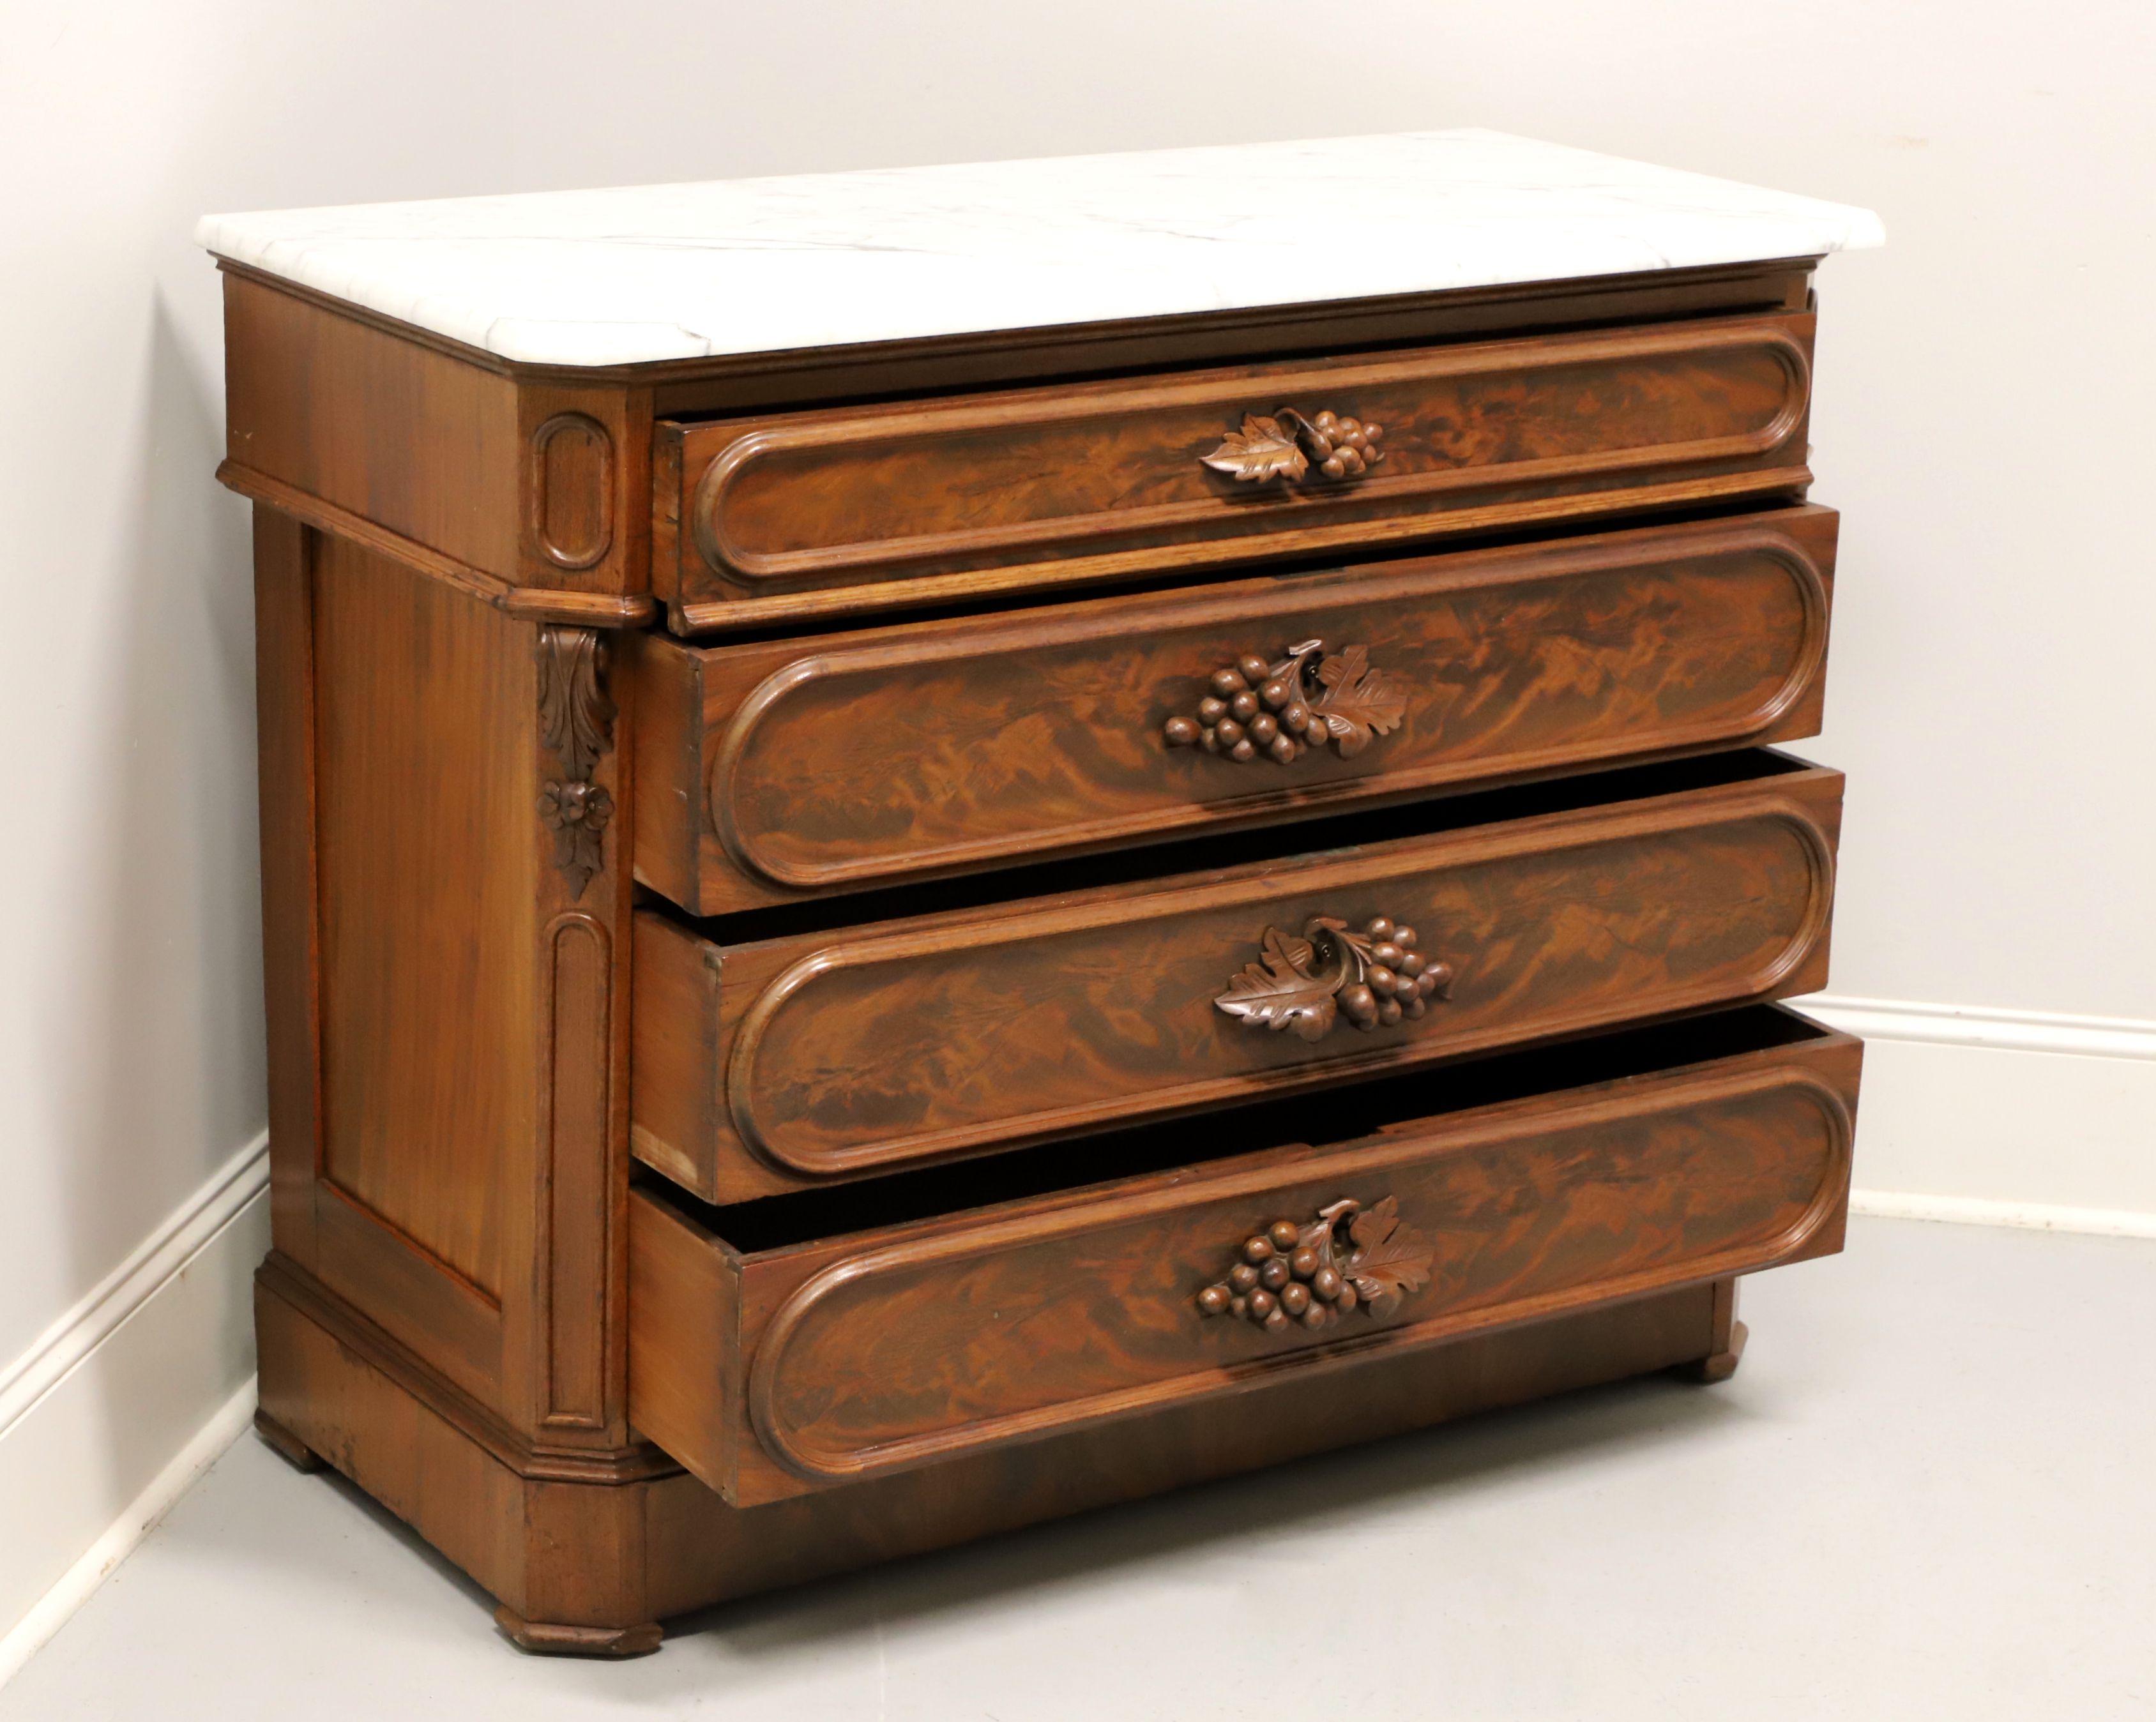 American Antique Early 20th Century Victorian Burl Walnut Marble Top Four-Drawer Chest